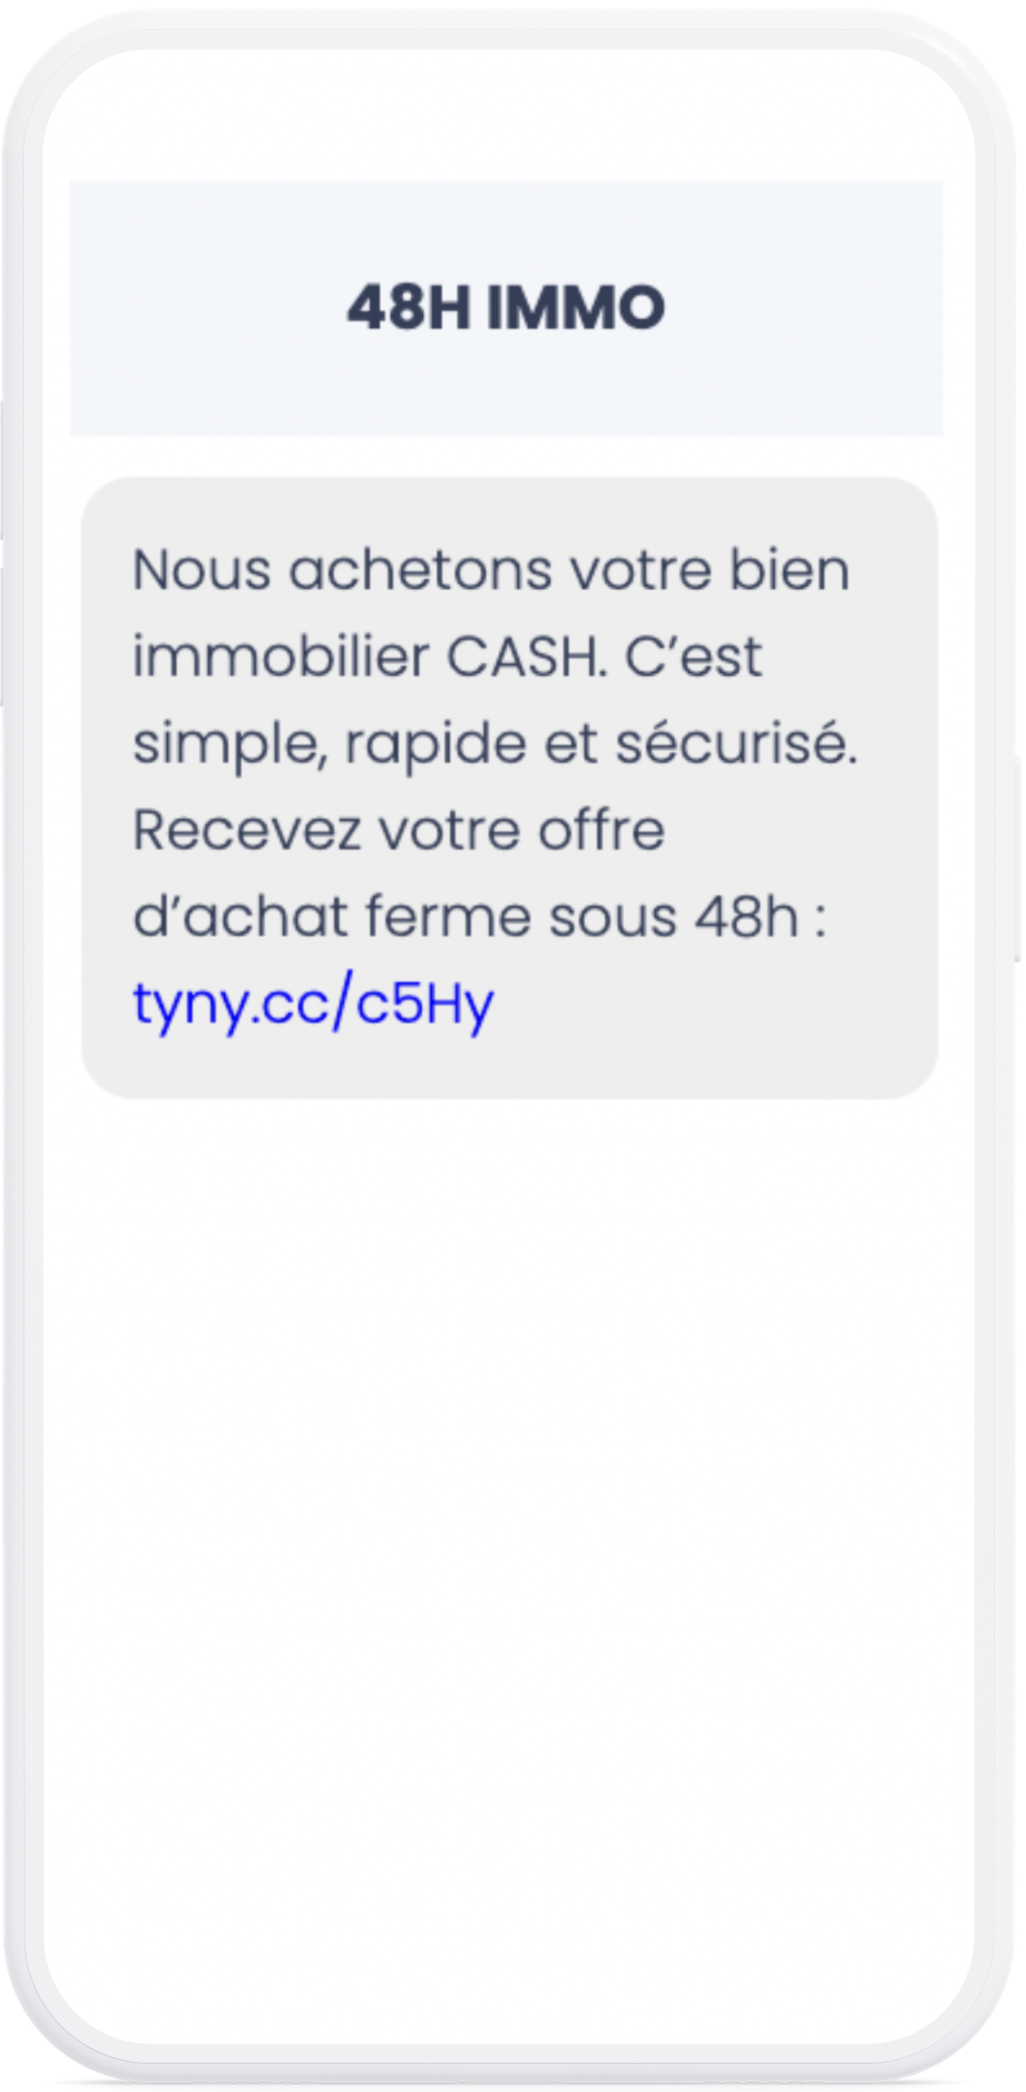 Exemple de campagne SMS pour 48 h IMMO